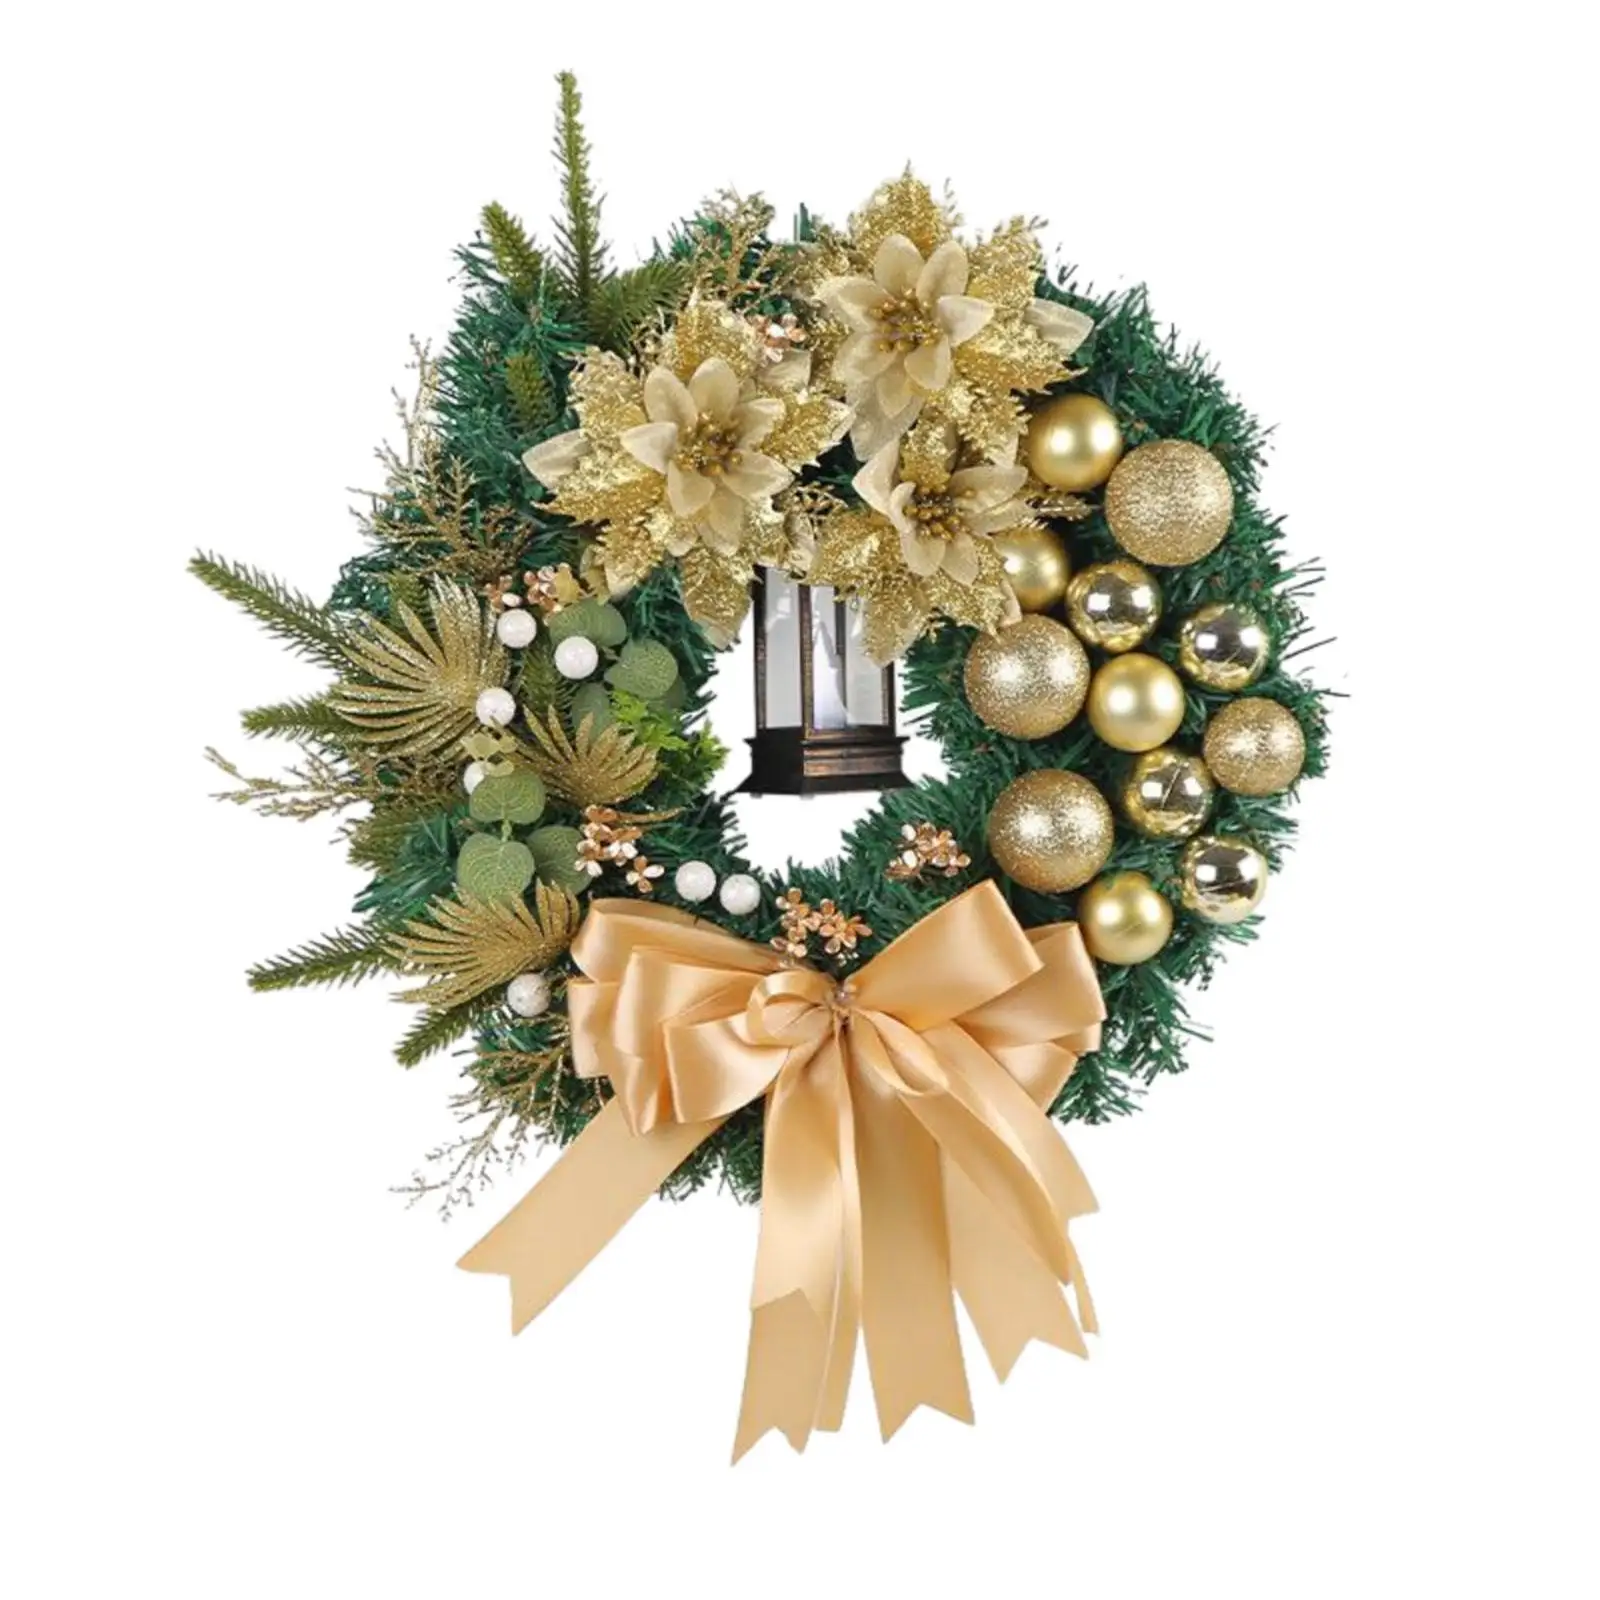 Christmas Wreath with Ball Ornaments Large Ribbon Bowknot 16 inch Xmas Wreath for Thanksgiving Window Outdoor Porch Decor